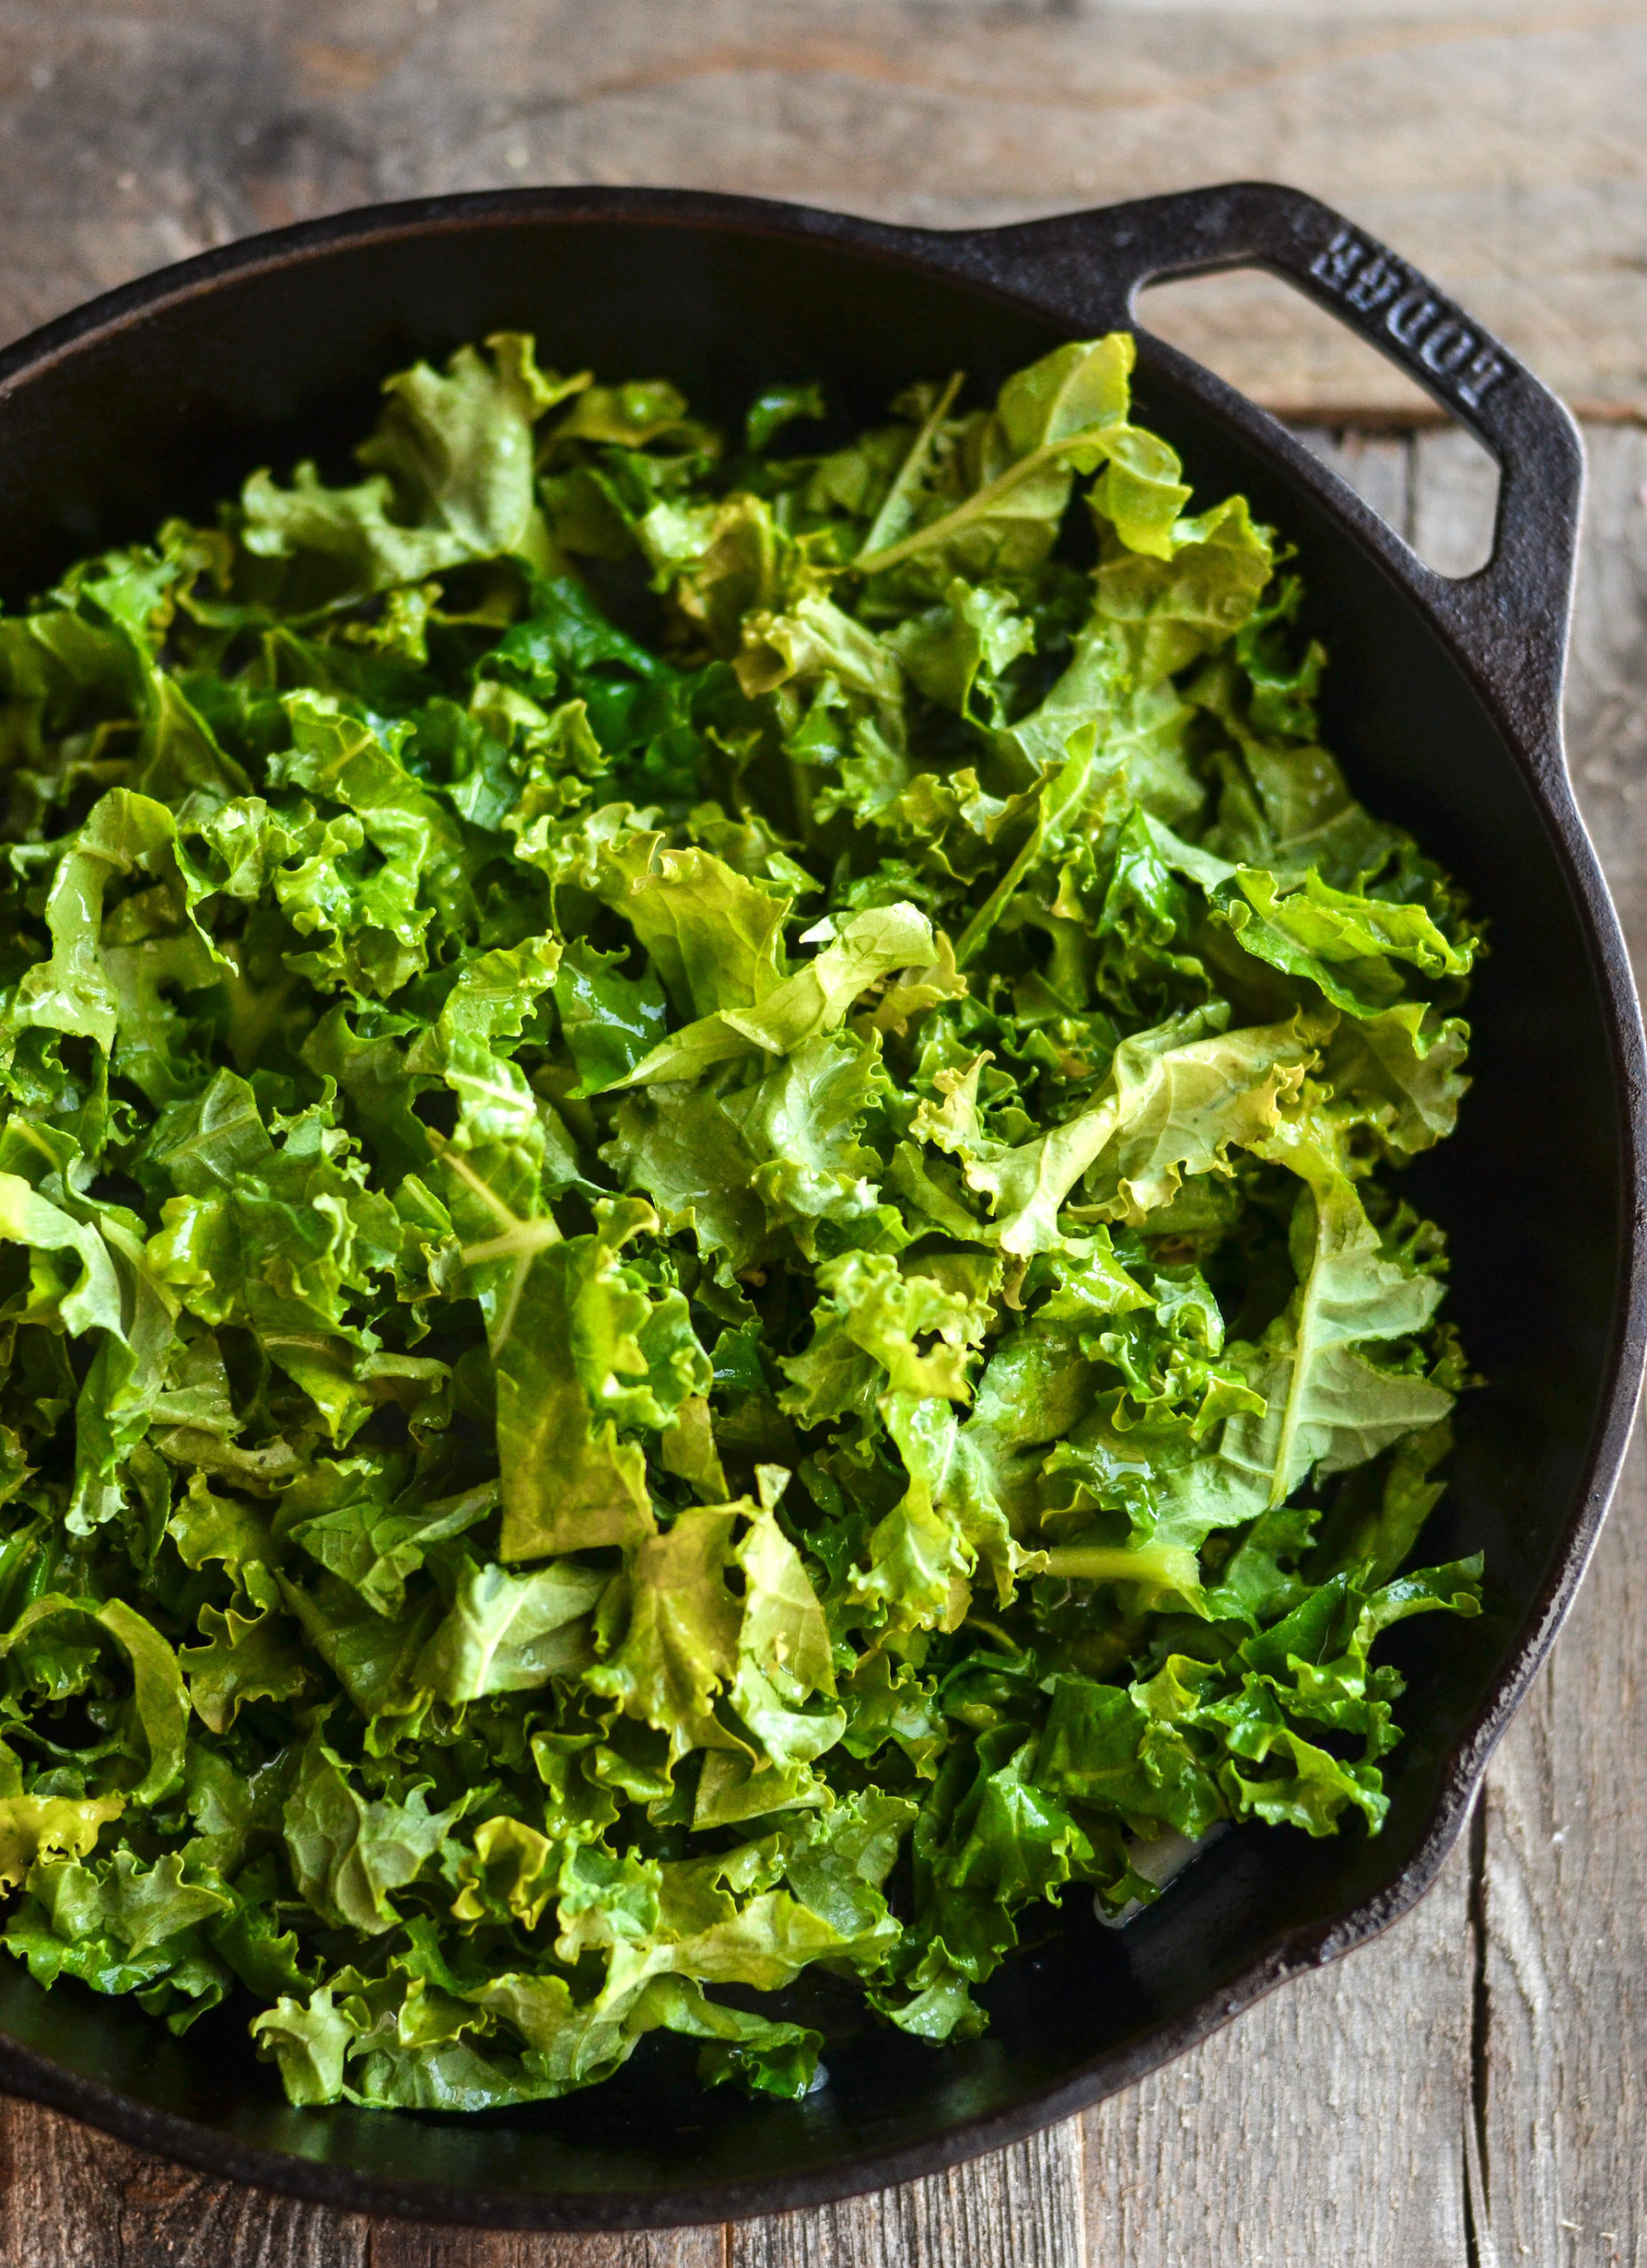 Kale cut into thin strips and added to a cast iron pan